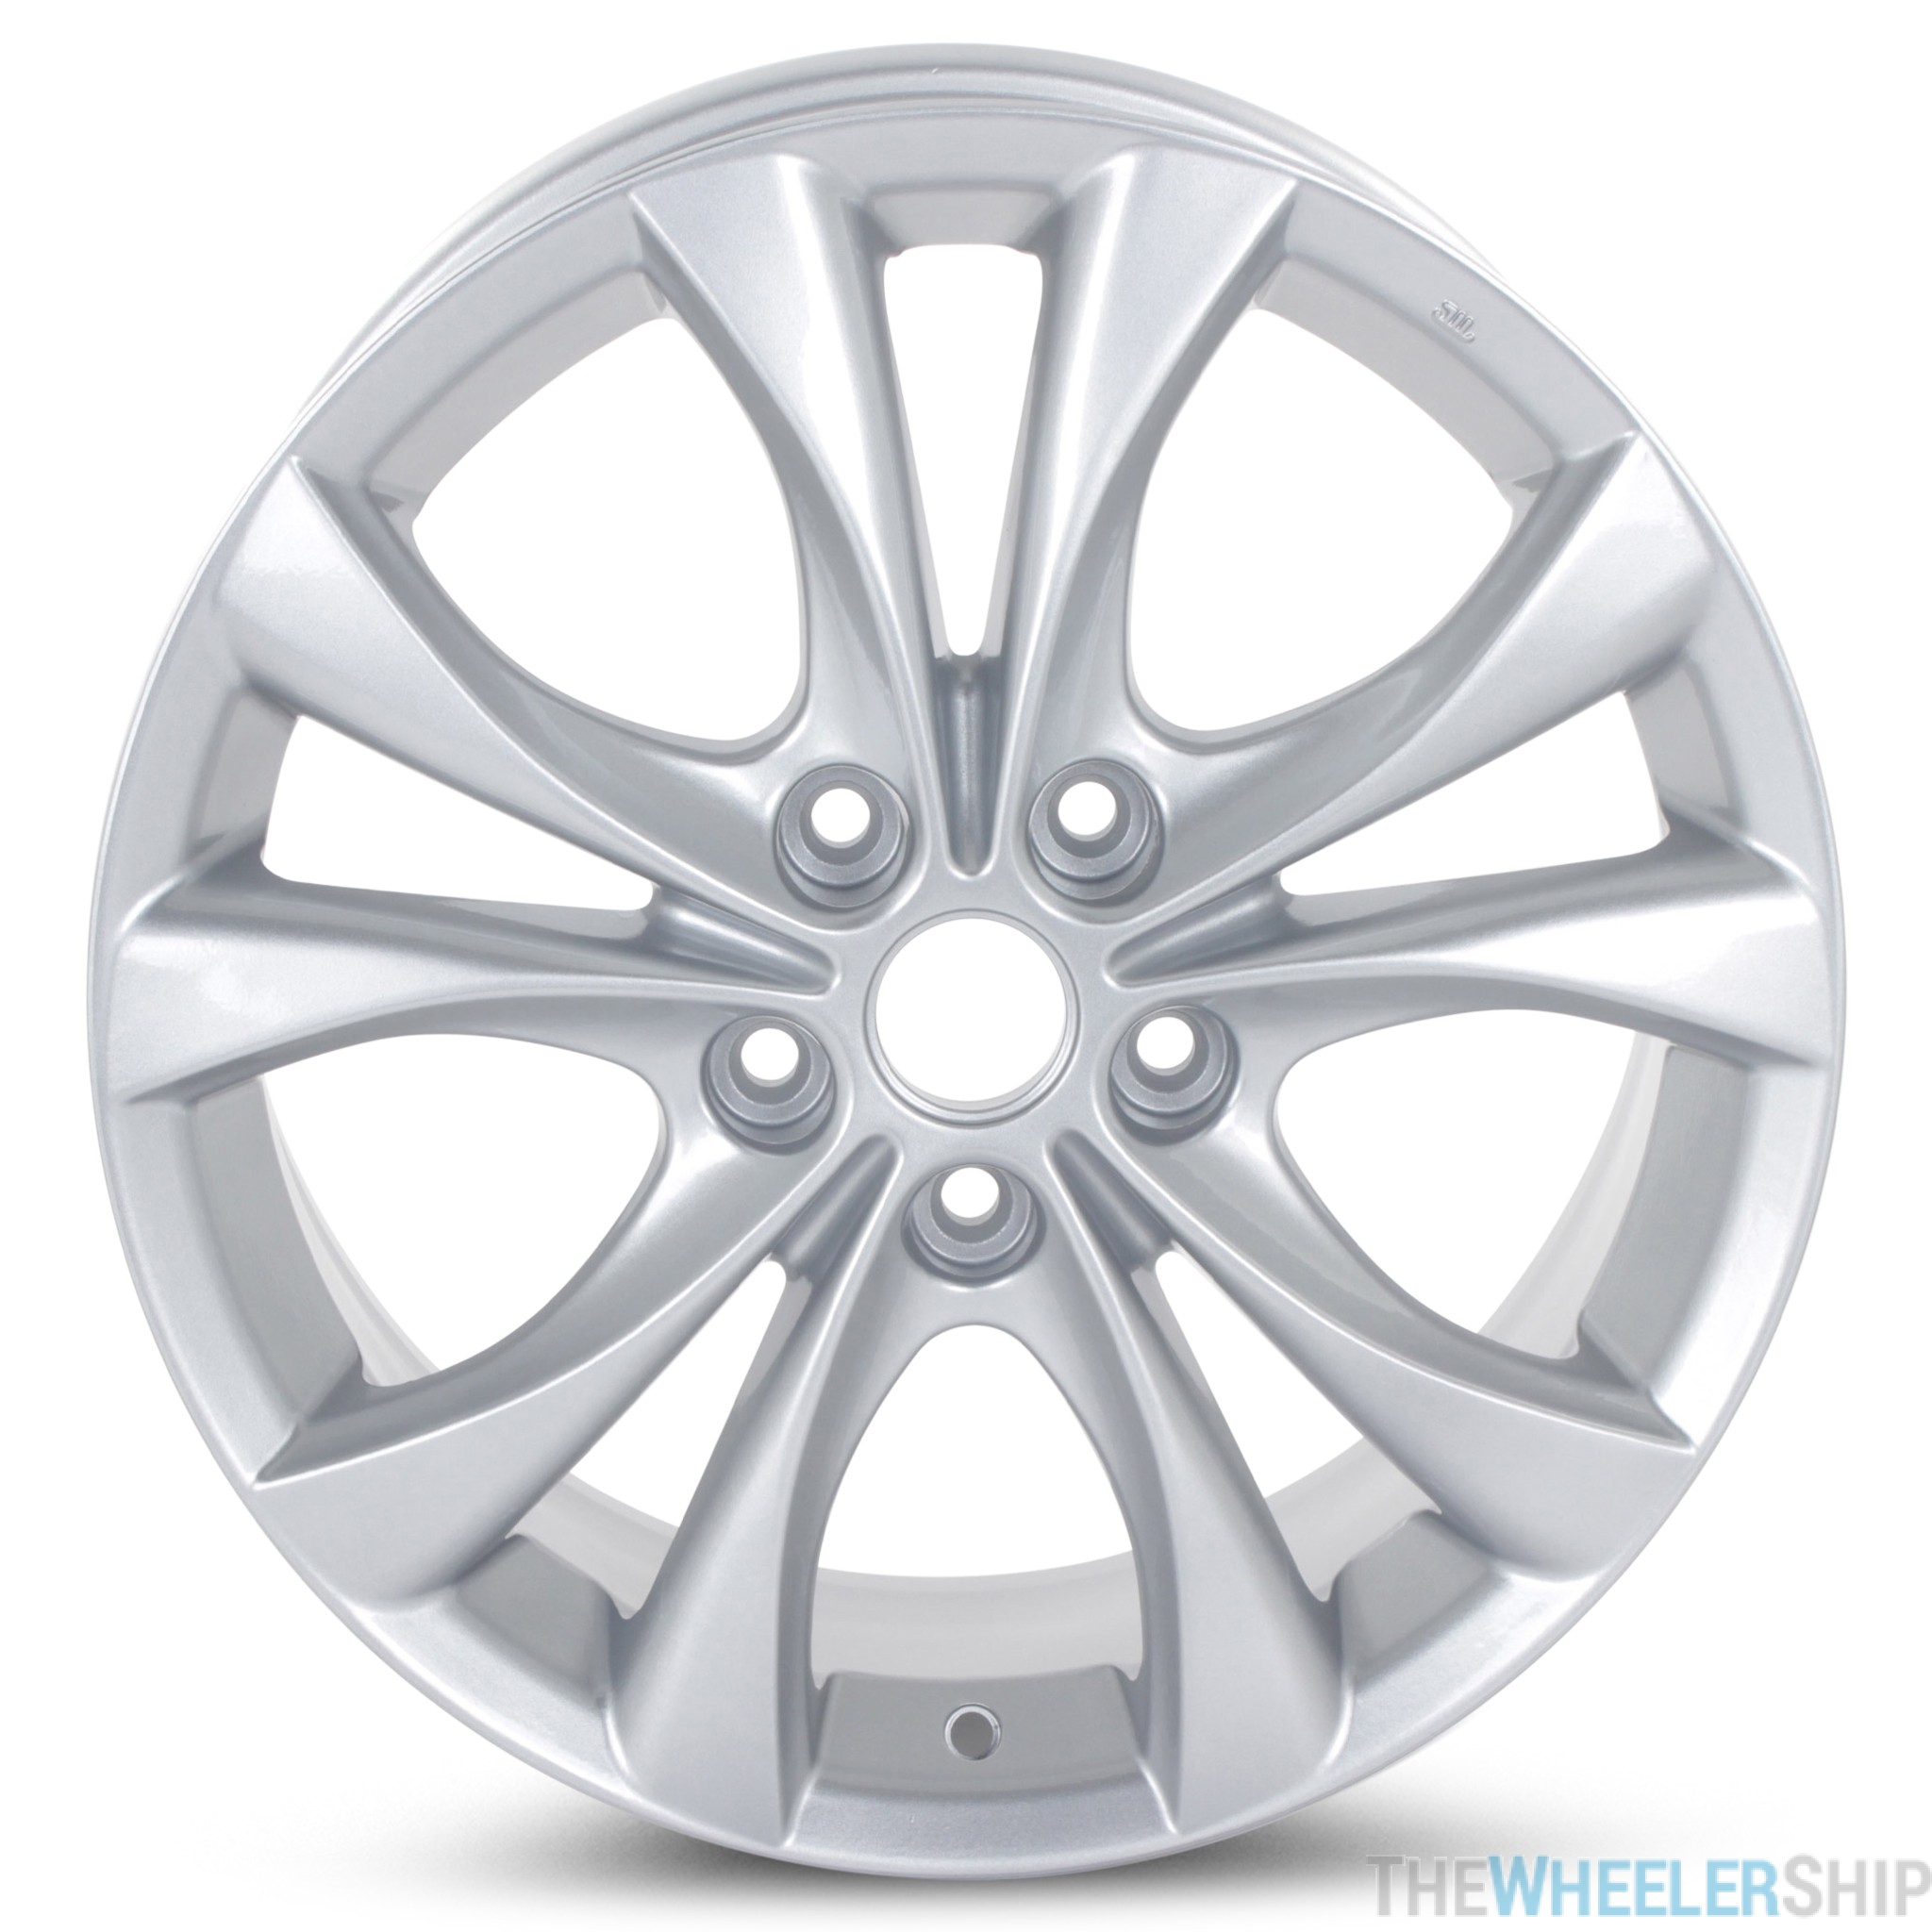 New 16 x 6.5 Replacement Wheel for Mazda 3 2010 2011 Rim 64927 